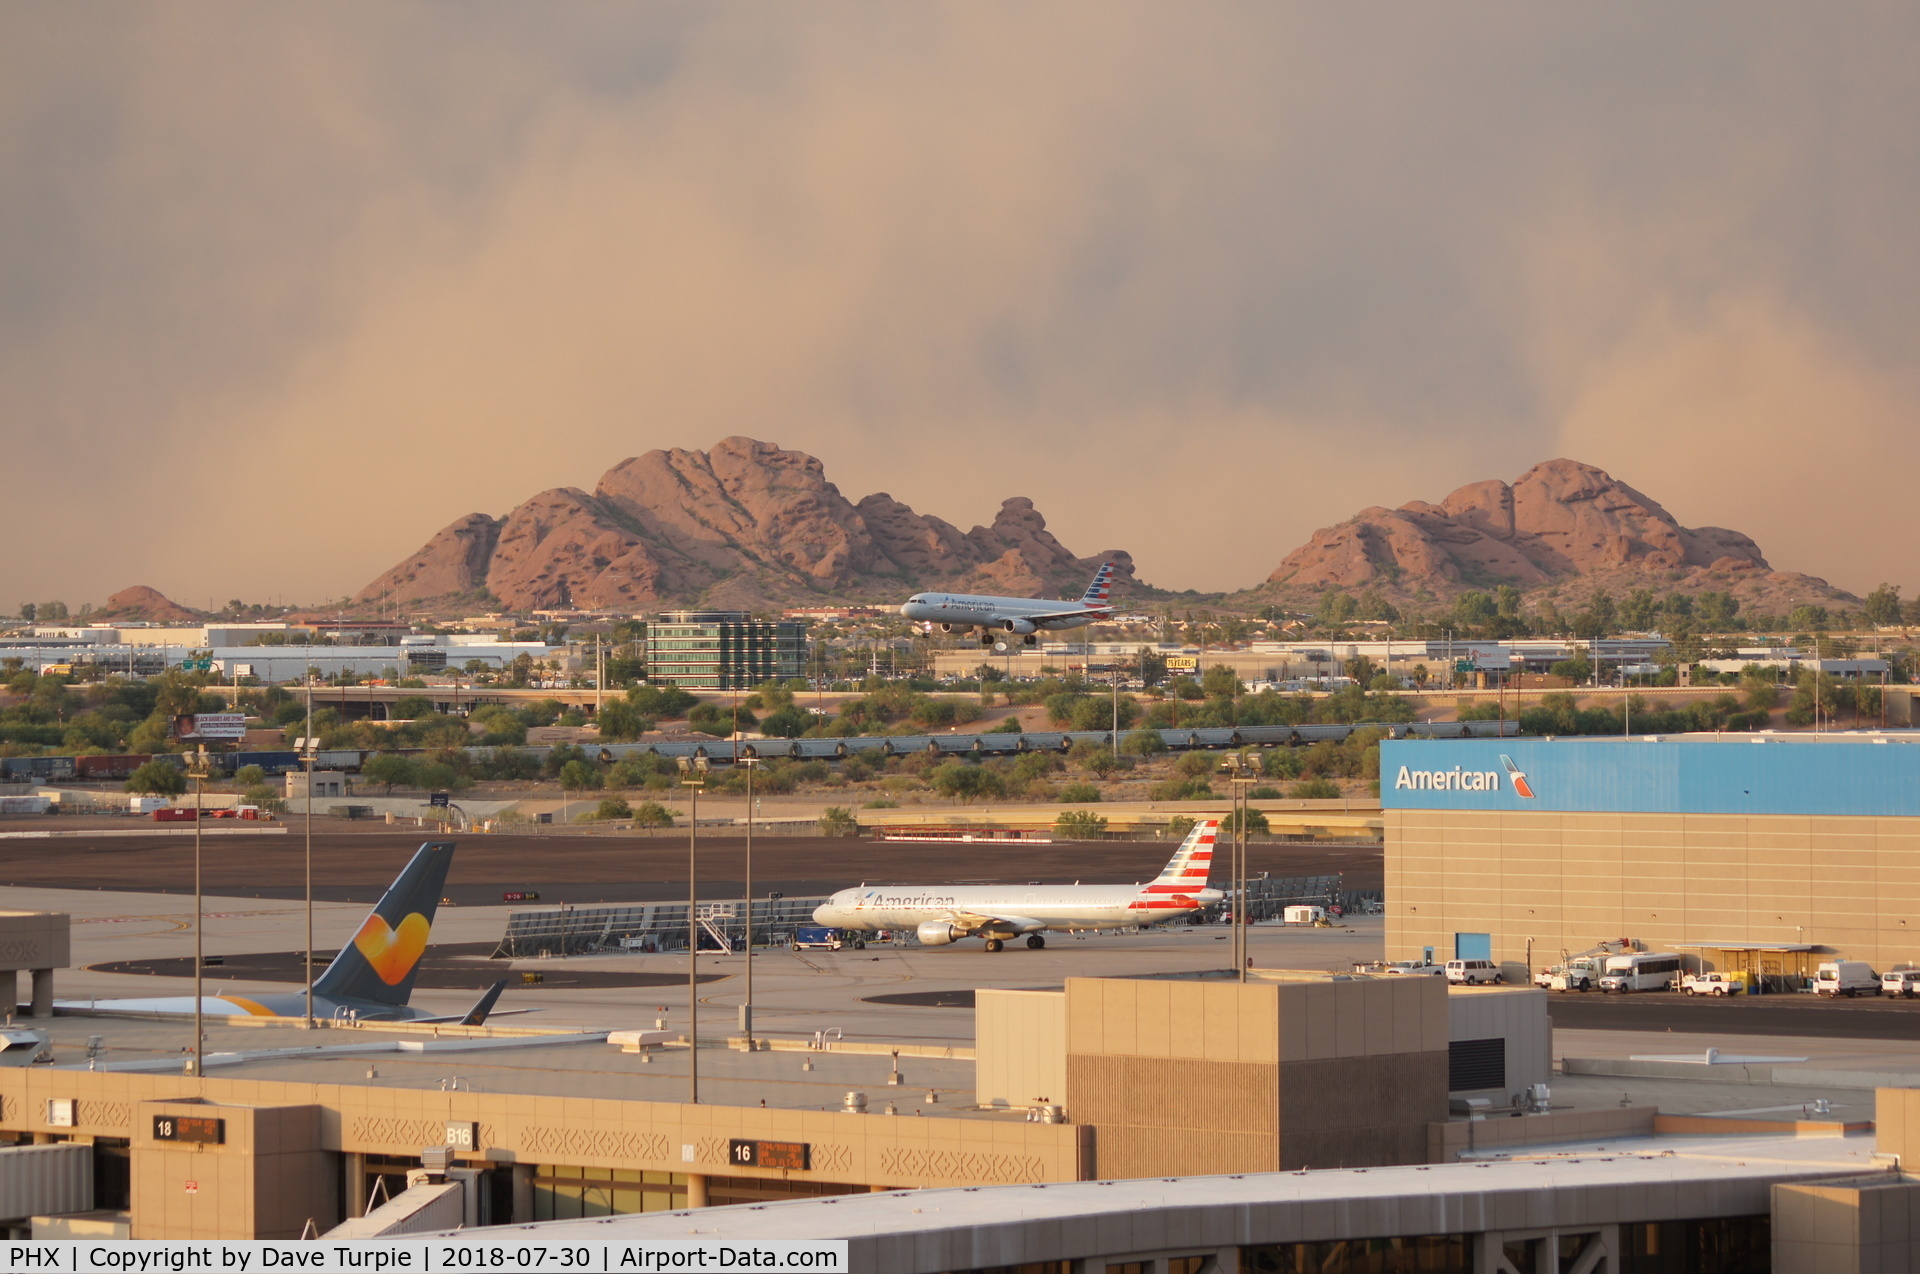 Phoenix Sky Harbor International Airport (PHX) - A big dust storm is approaching PHX from the east.